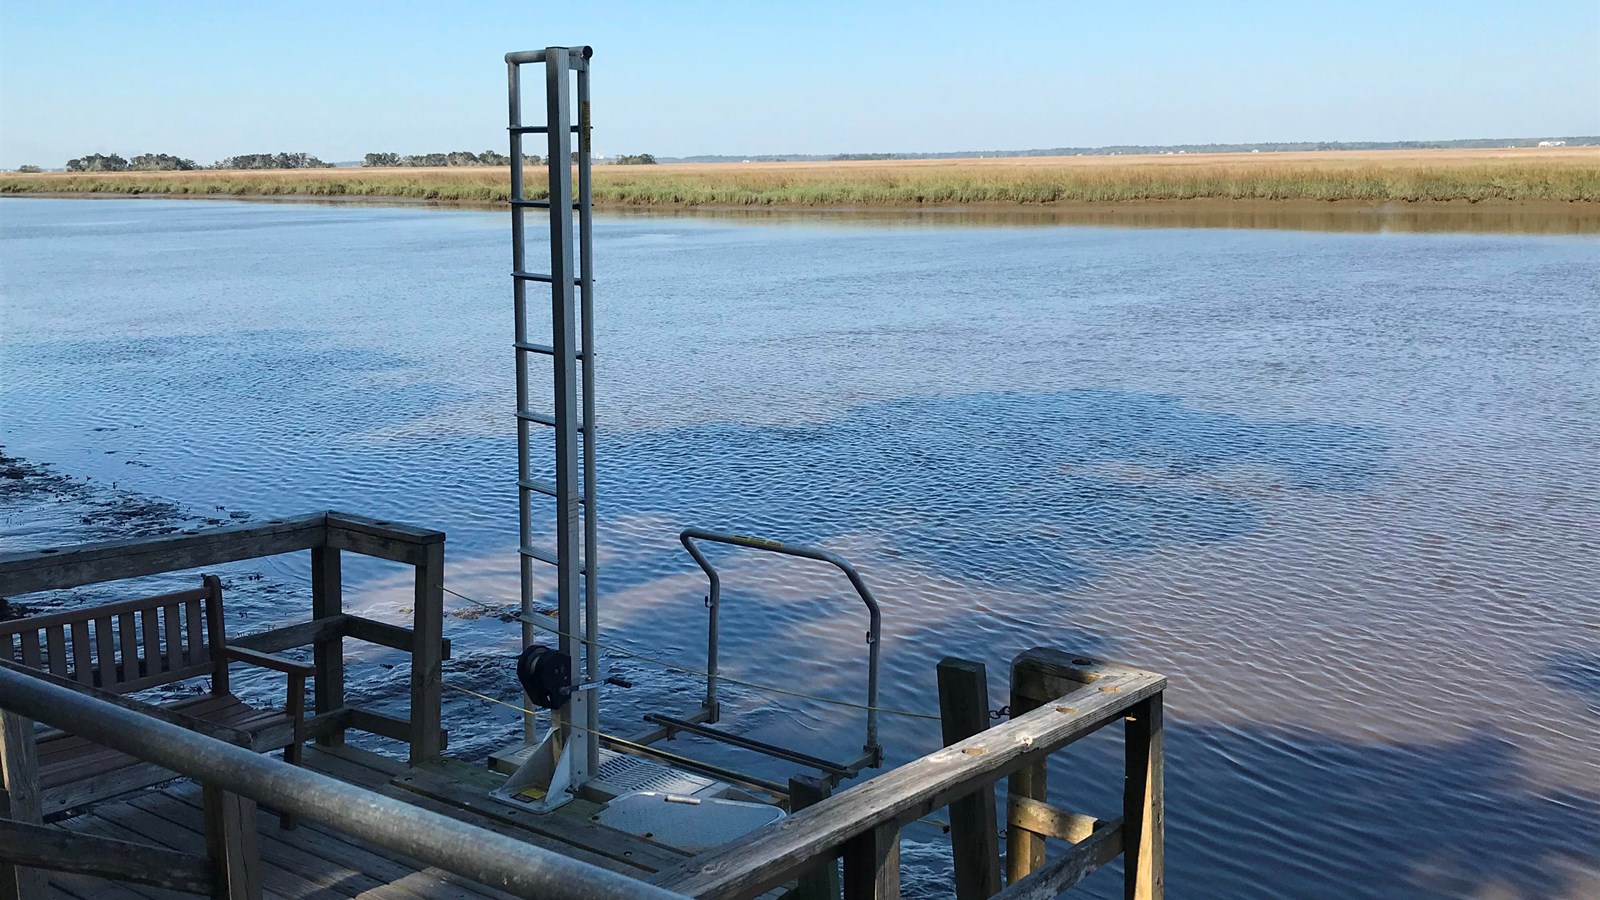 Mechanical kayak lift and wooden platform with river and salt marsh in background.